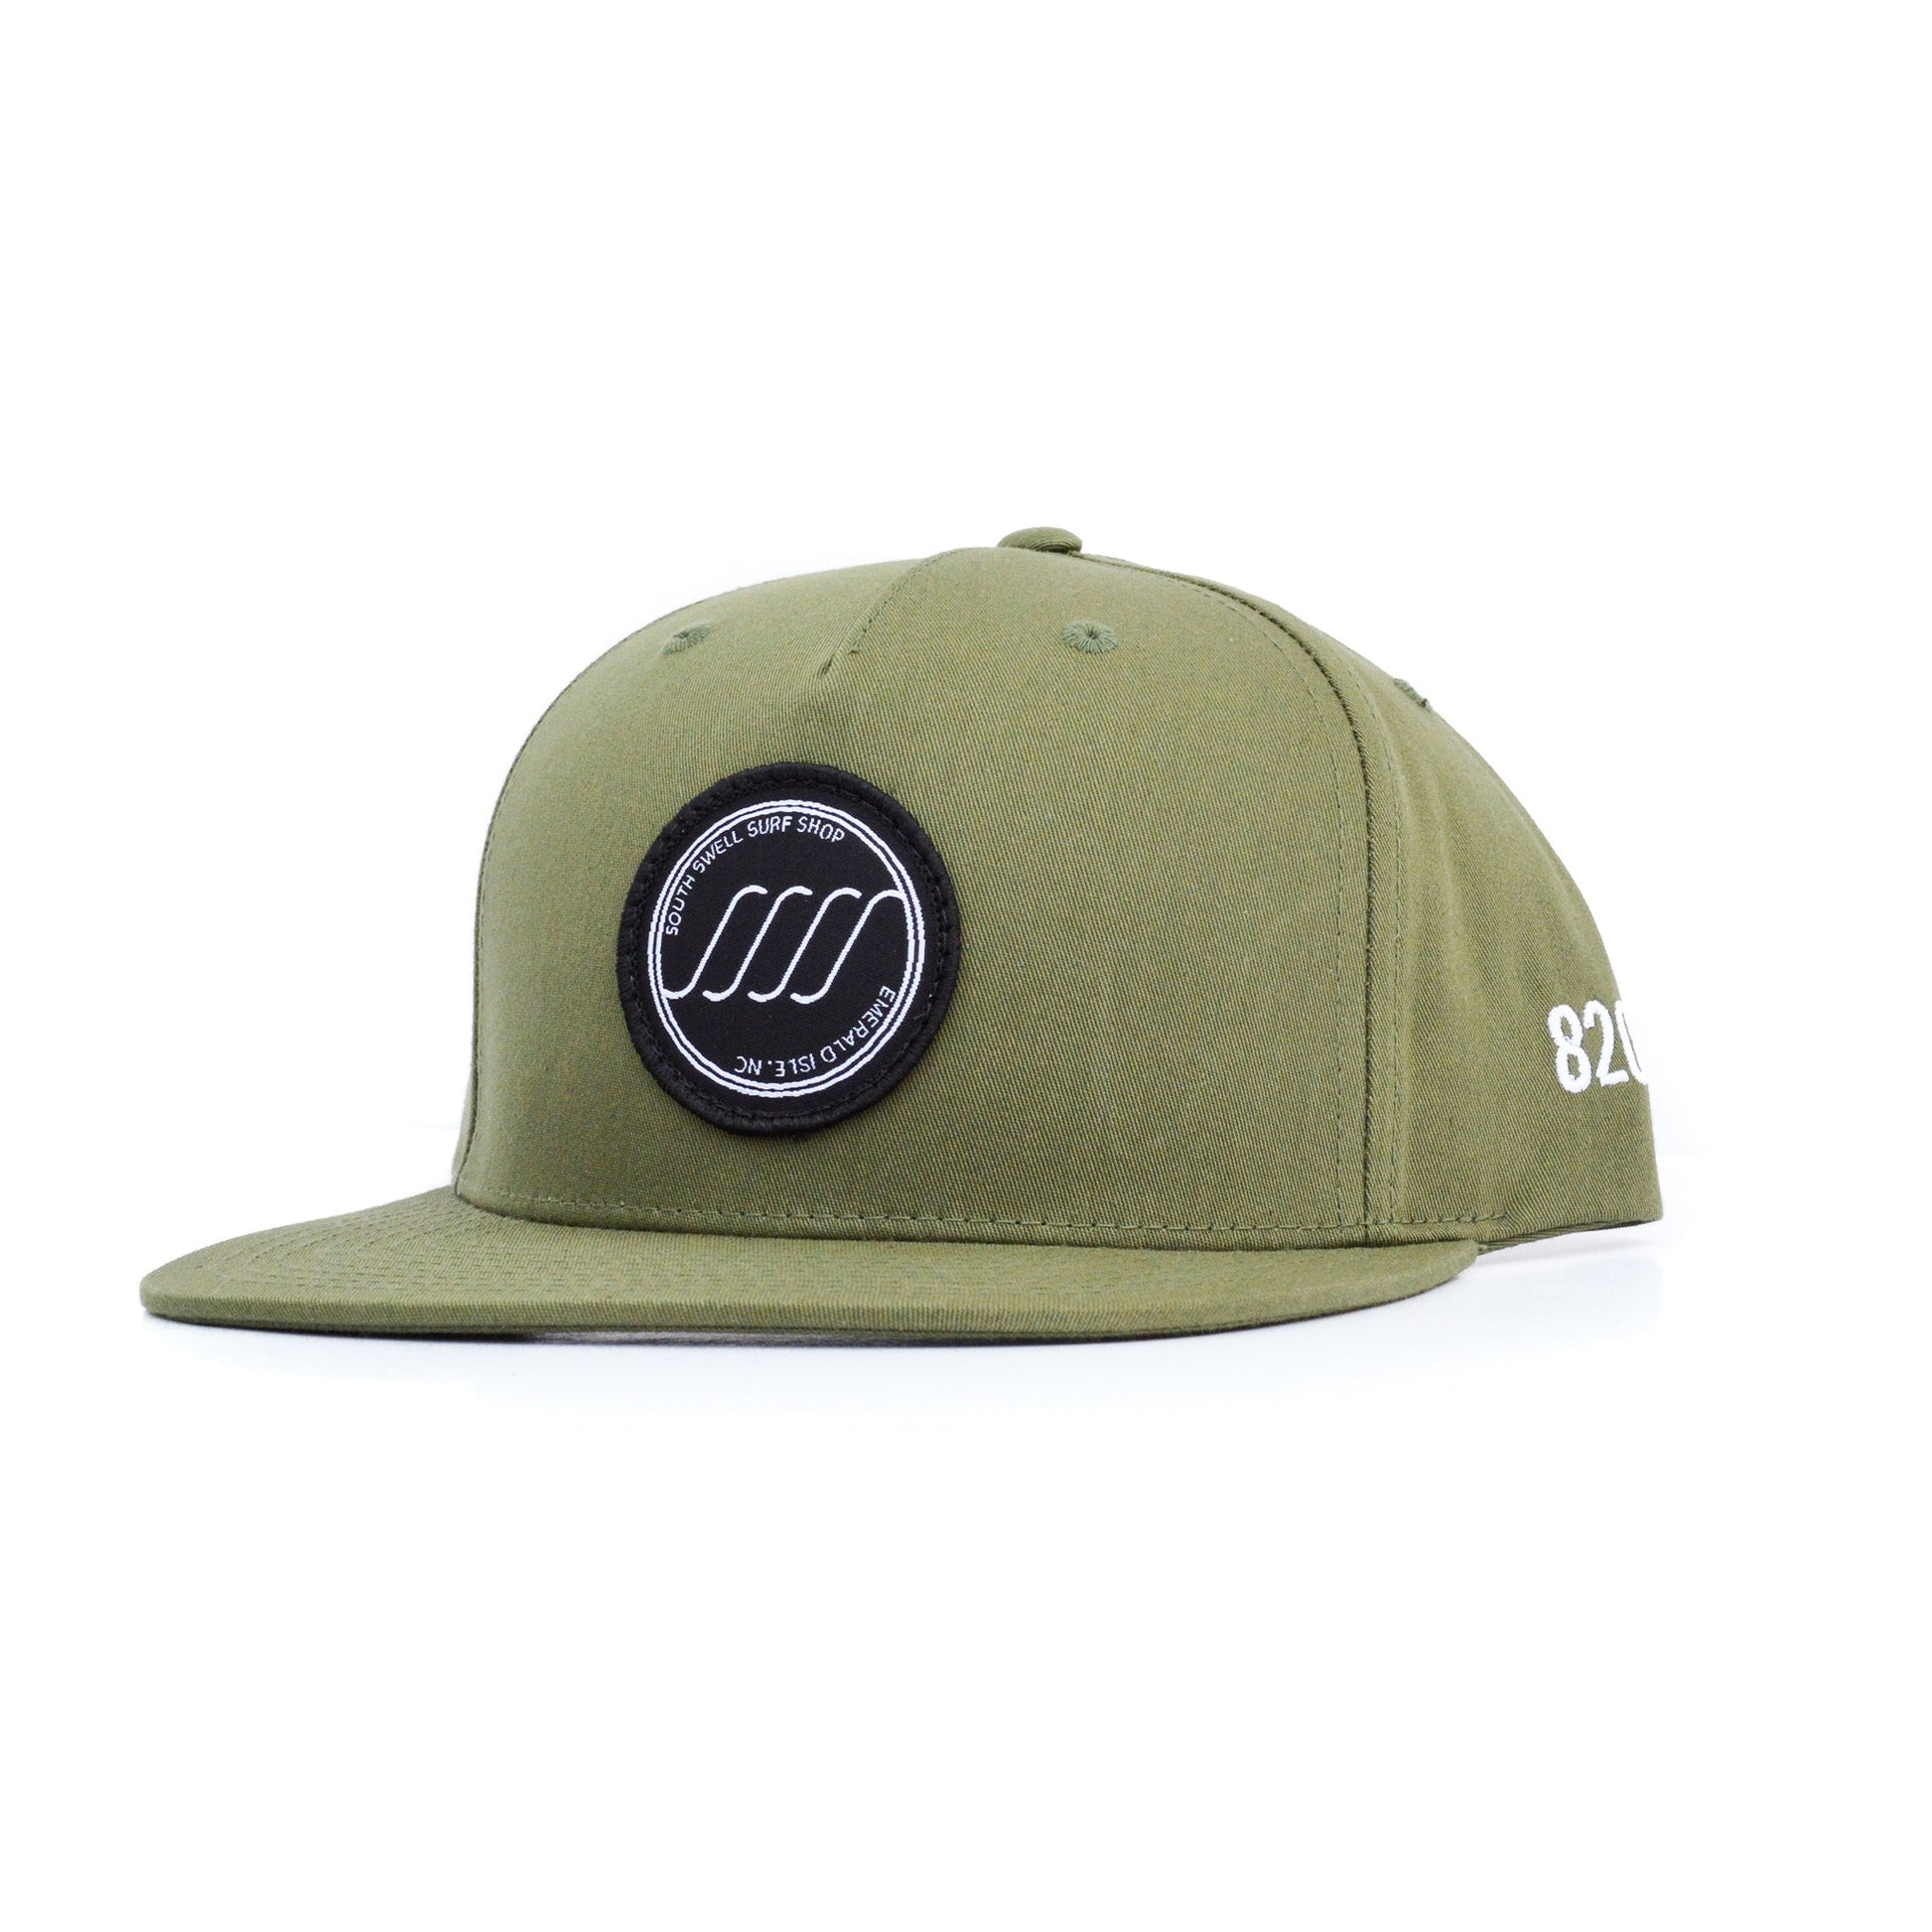 SOUTH SWELL Circle Patch Flat Bill Hat Default SOUTH SWELL Army 